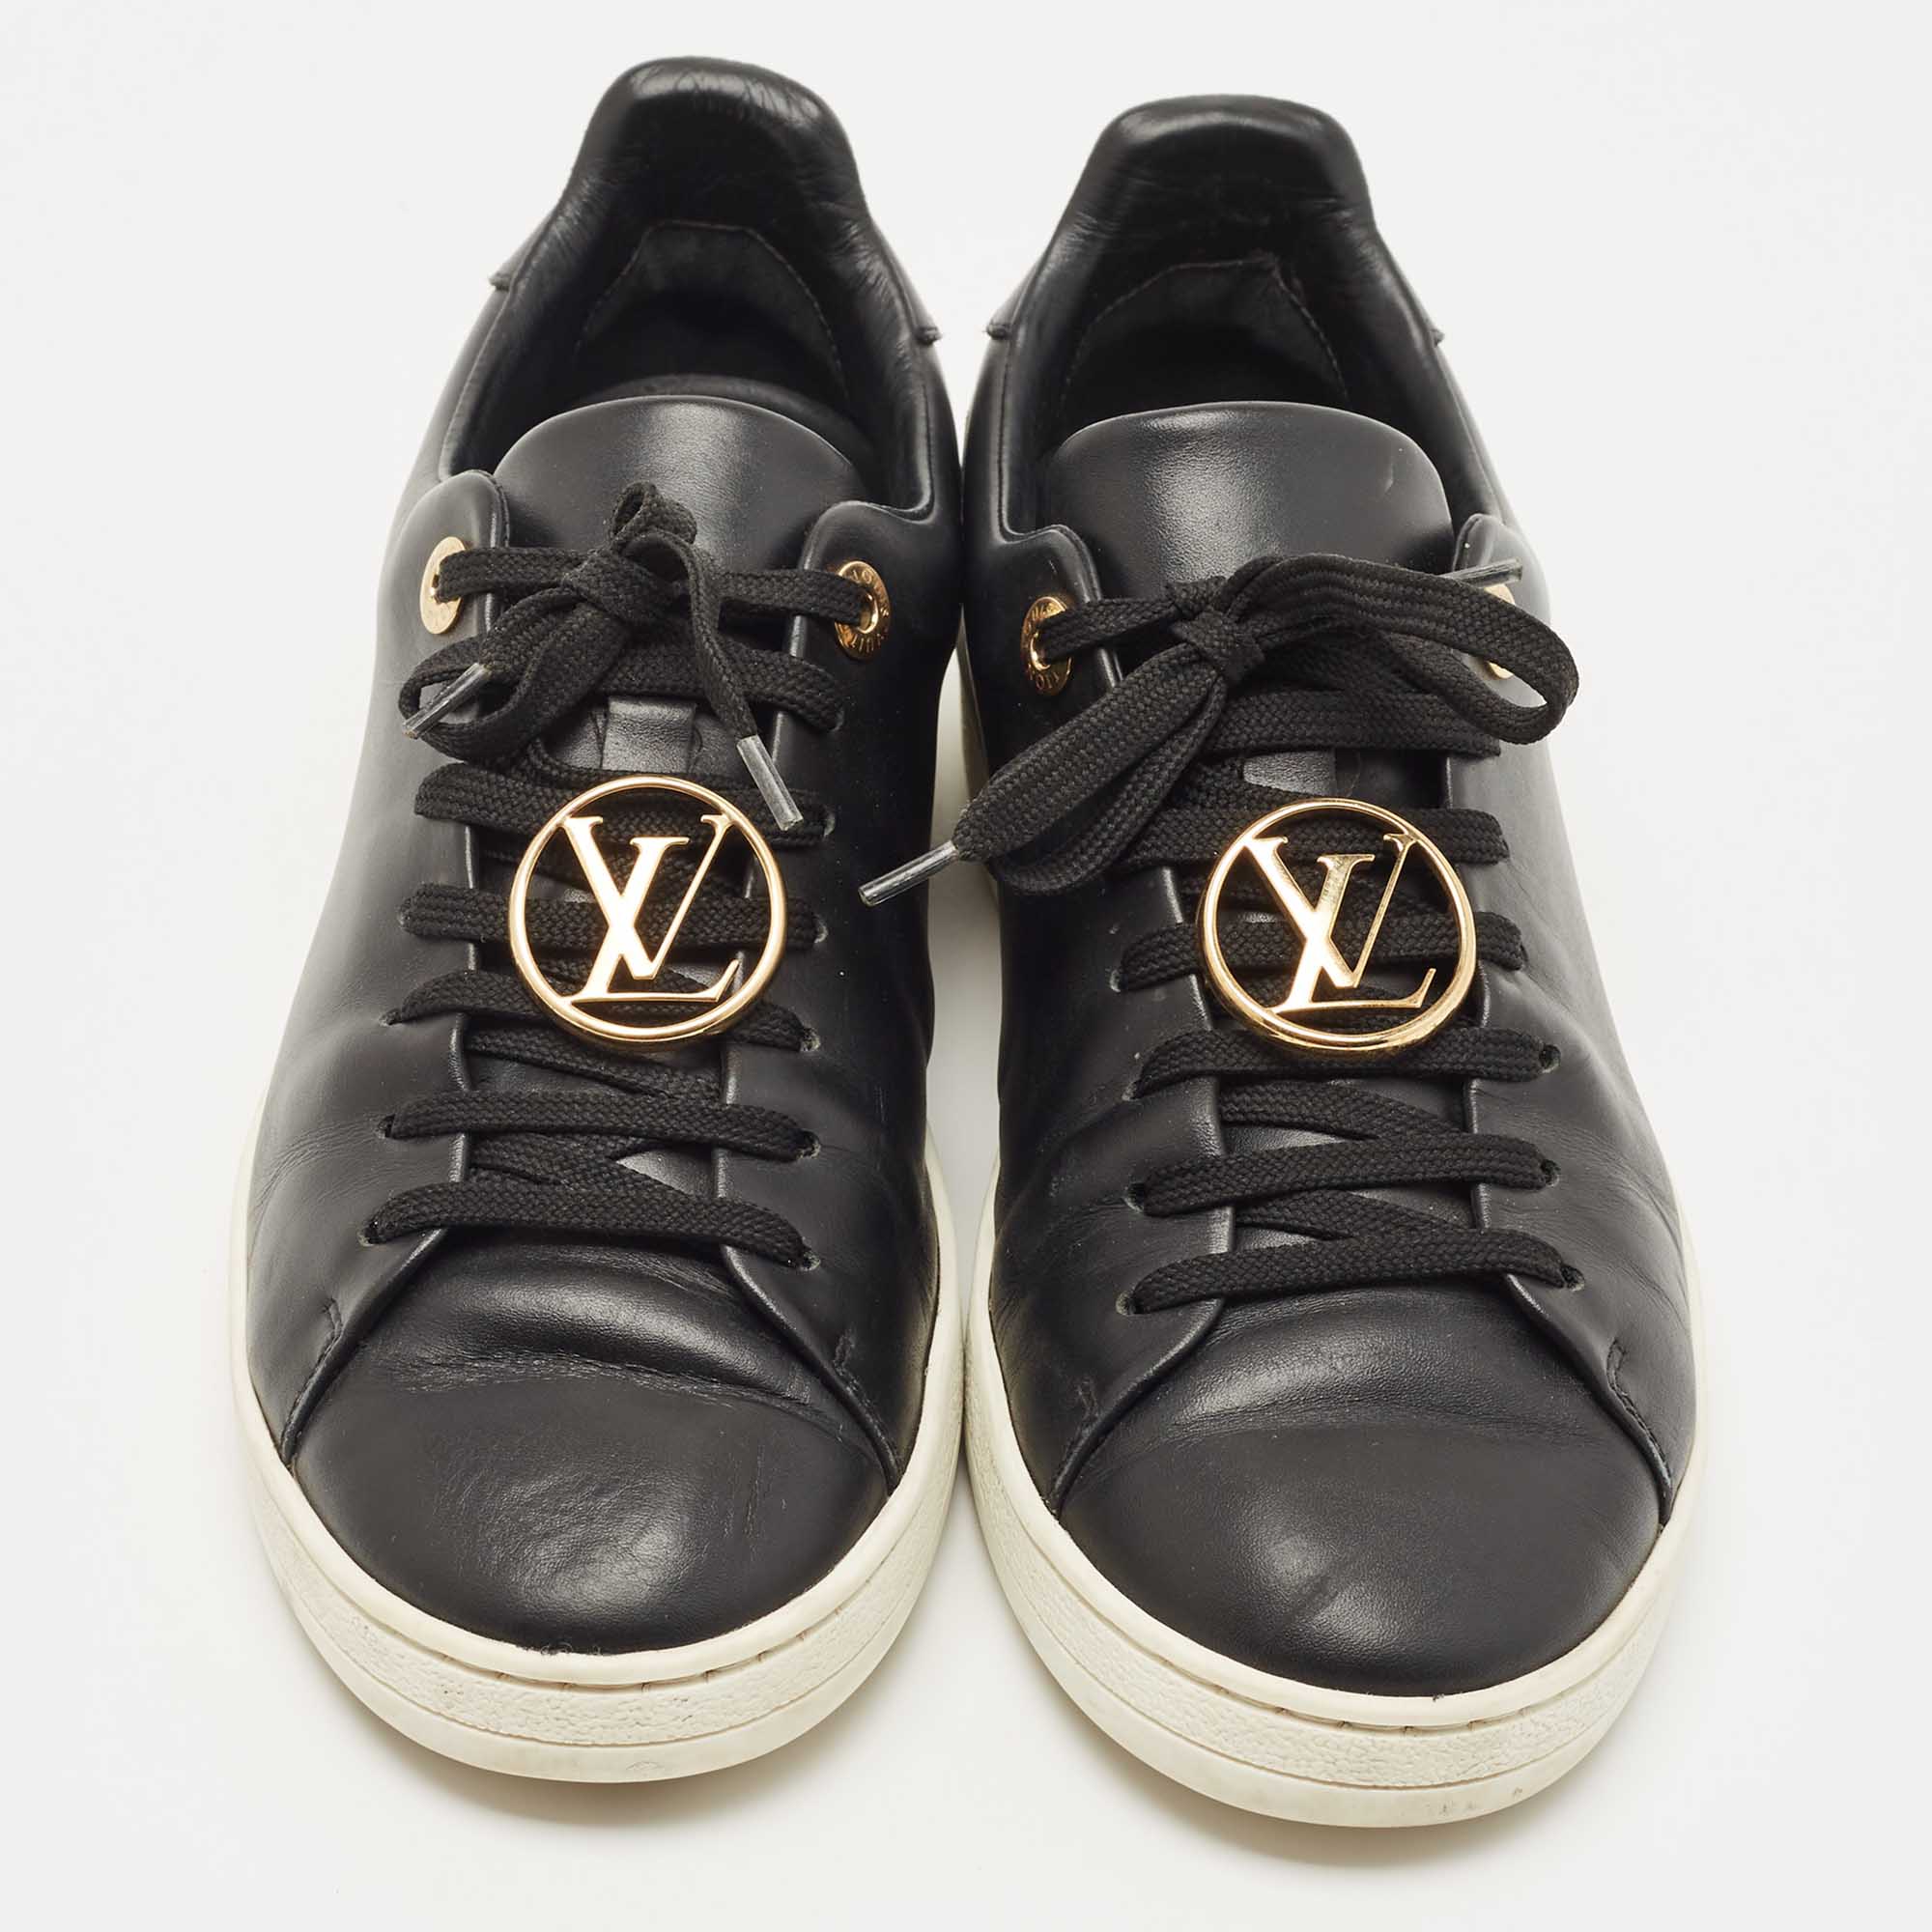 Louis Vuitton Black Leather Frontrow Sneakers Size 36.5